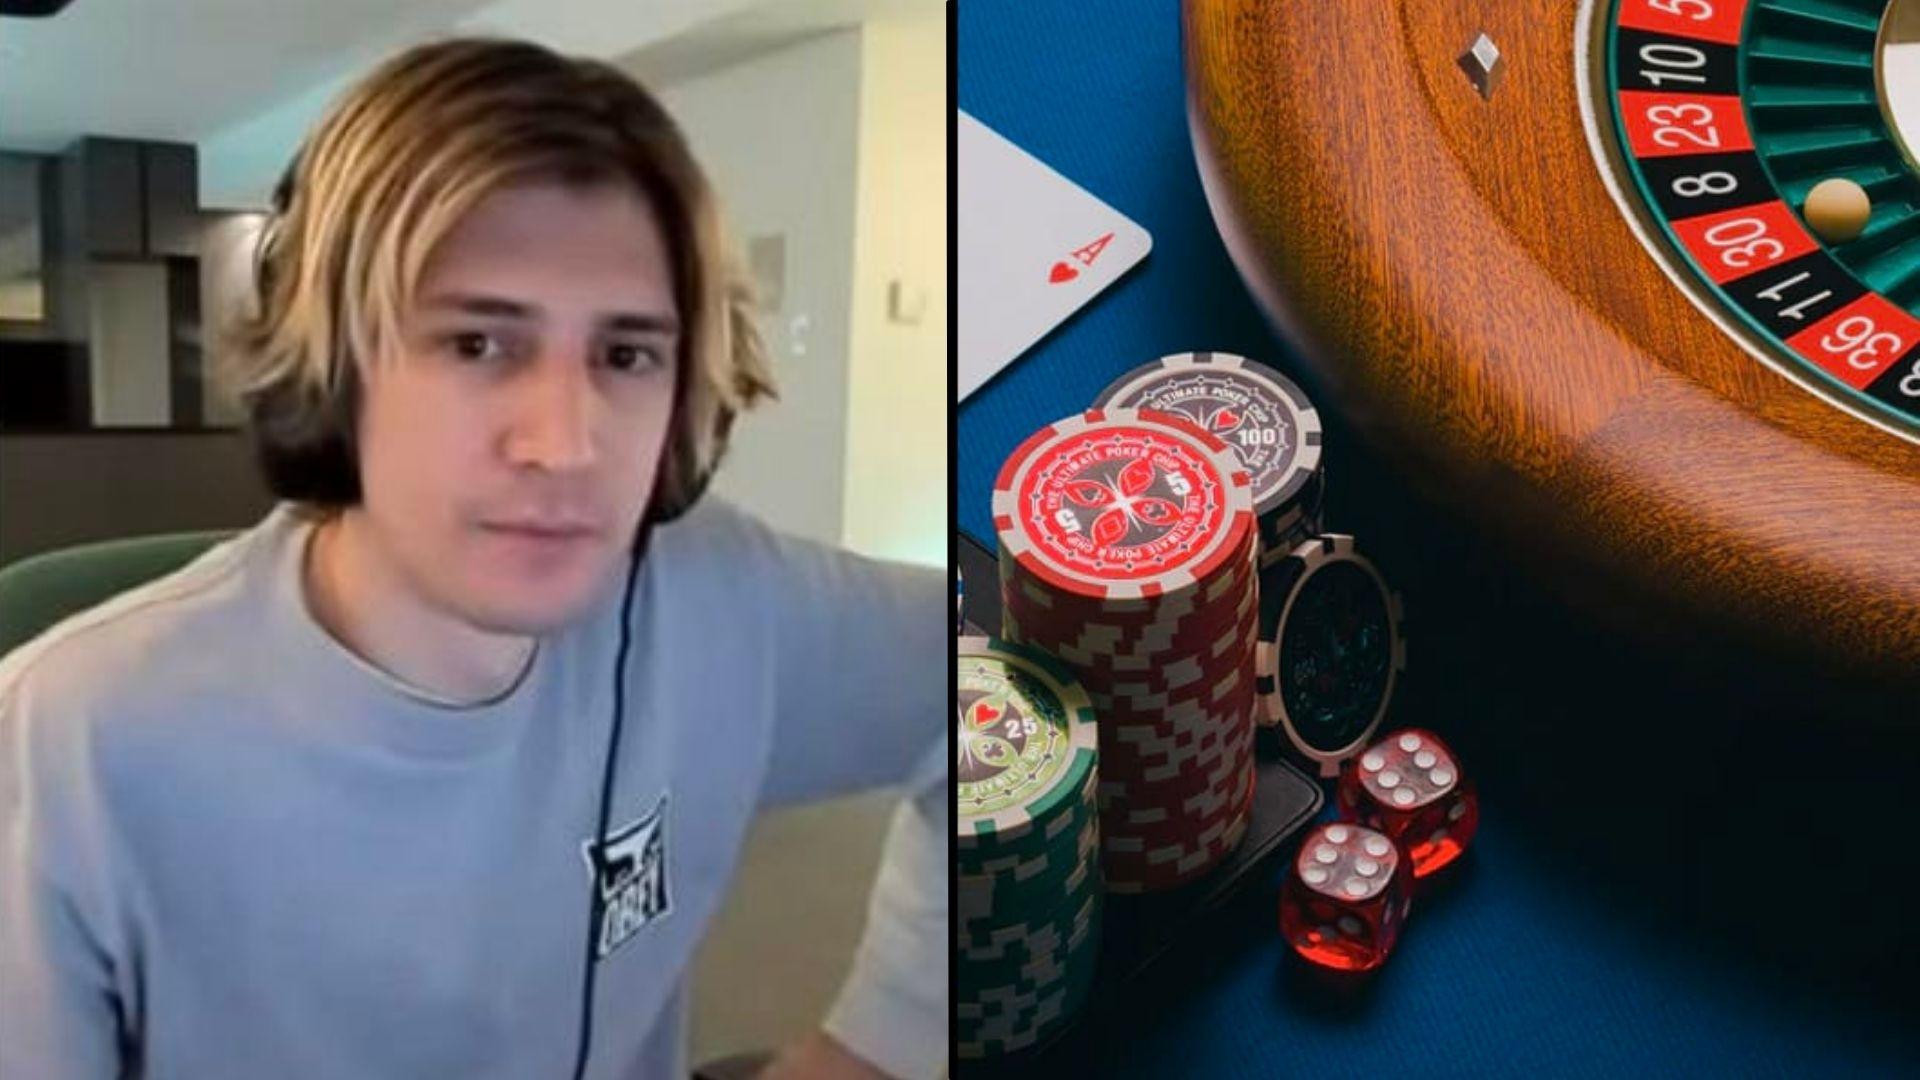 The Rust tournament just started and xQc is already gambling 